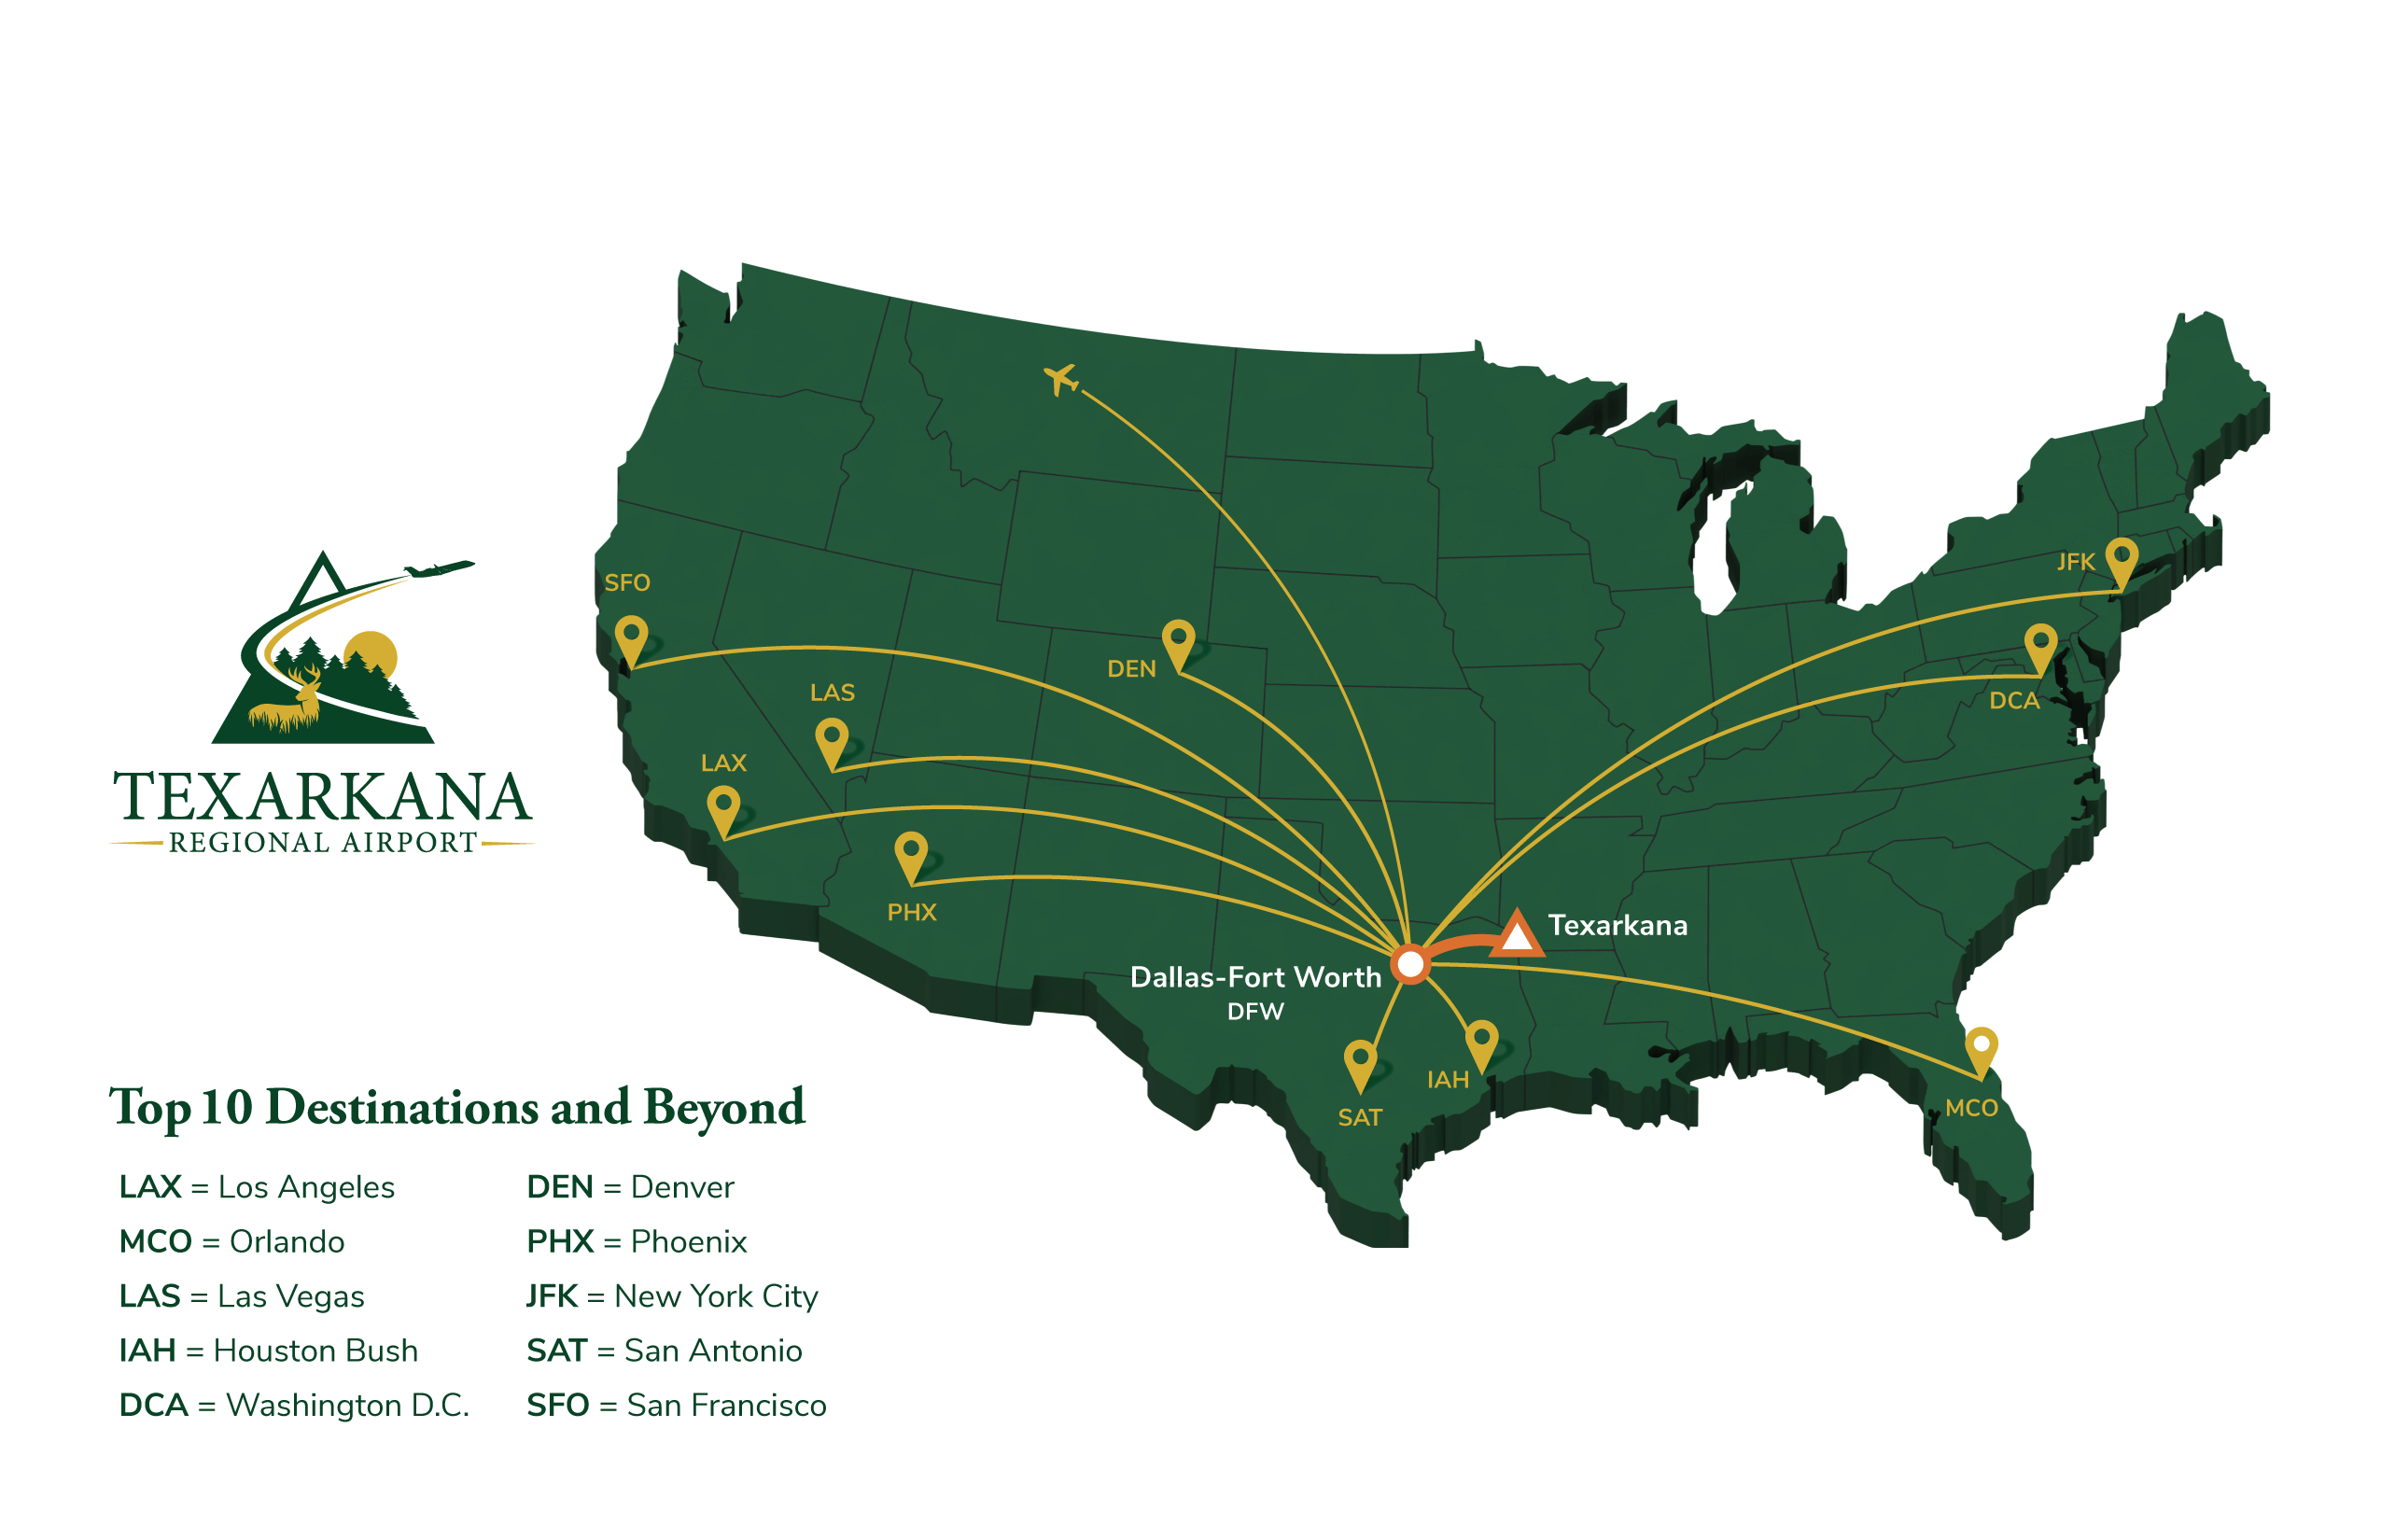 Route map showing the top 10 destinations at Texarkana Airport including LAX, MCO, LAS, IAH, DCA, DEN, PHX, JFK, SAT, and SFO.